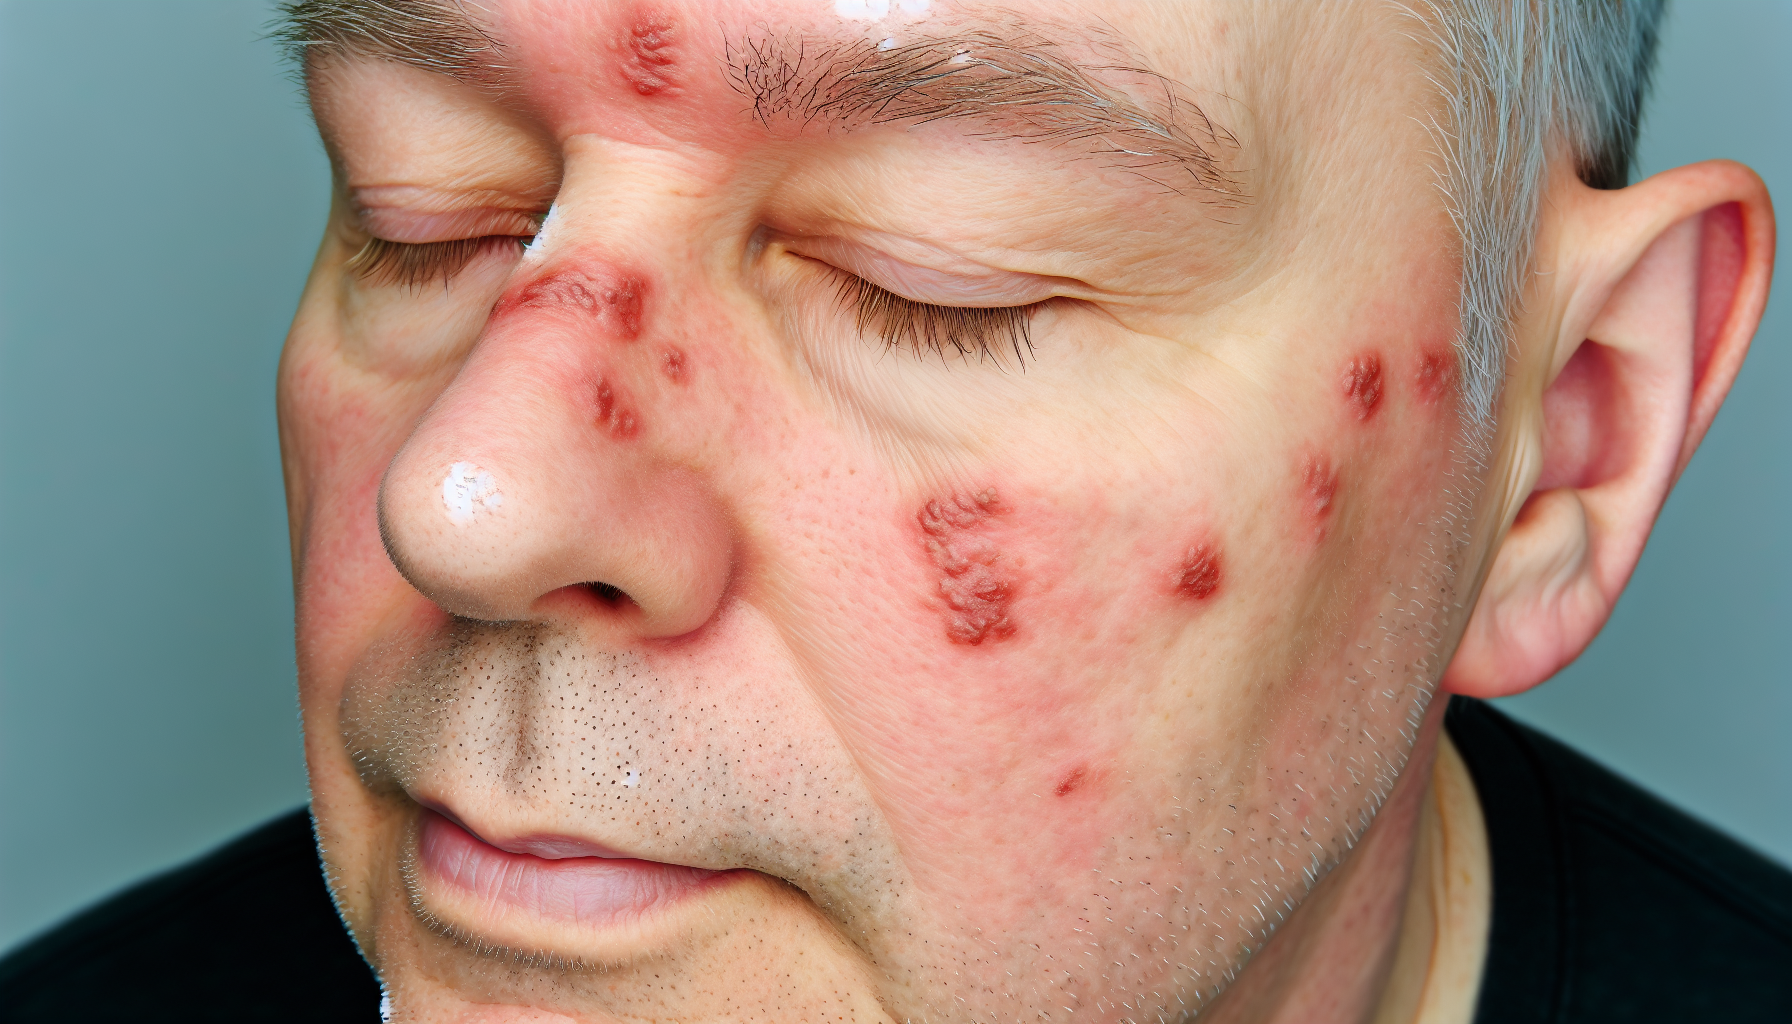 Photo of actinic keratosis on a person's face